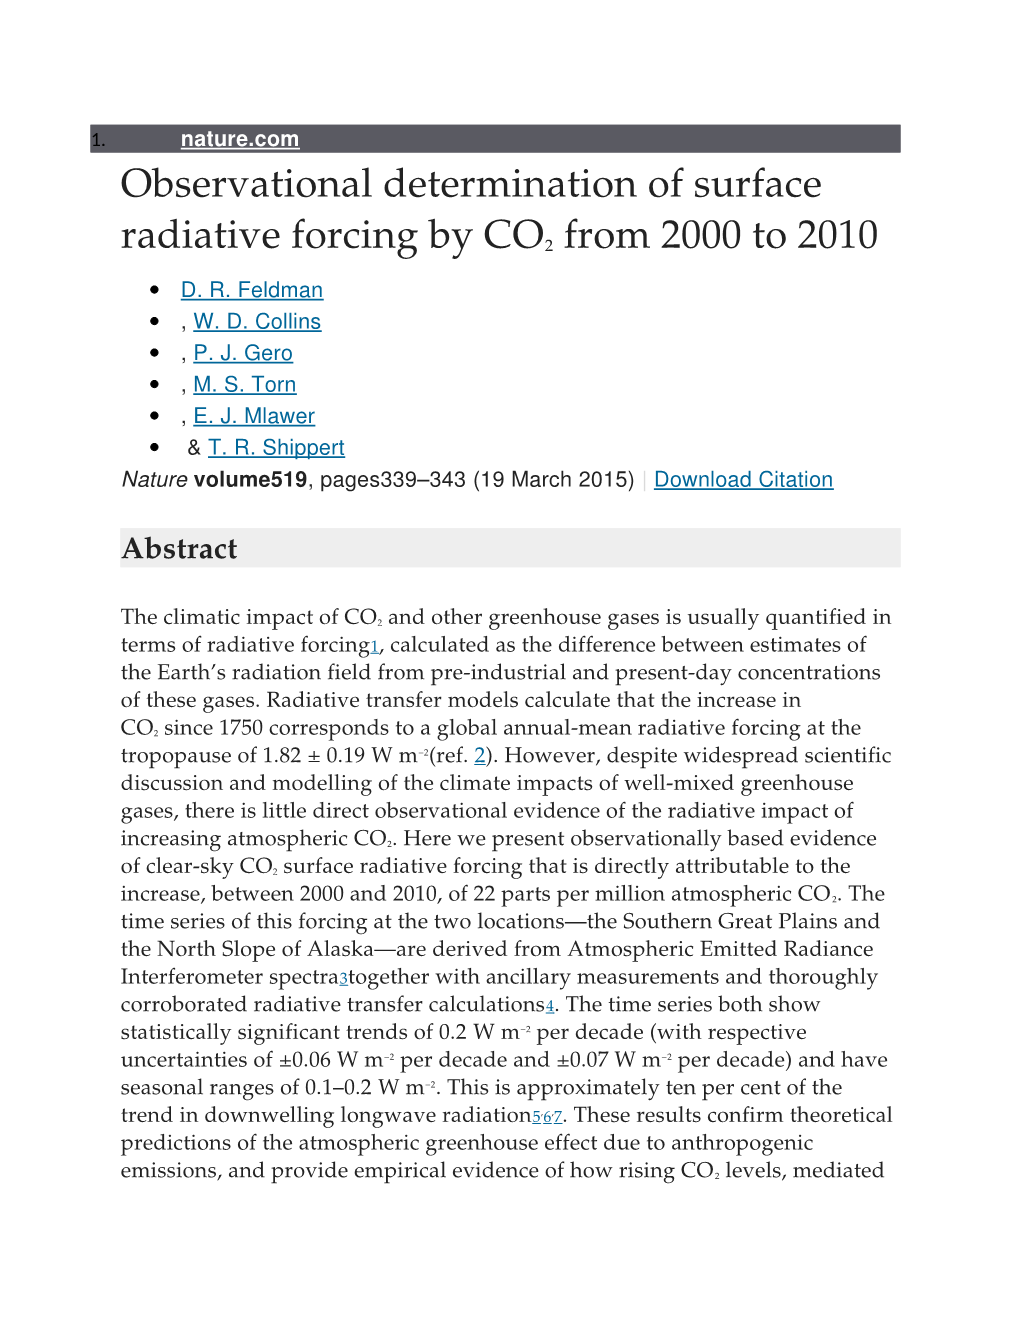 Observational Determination of Surface Radiative Forcing by CO2